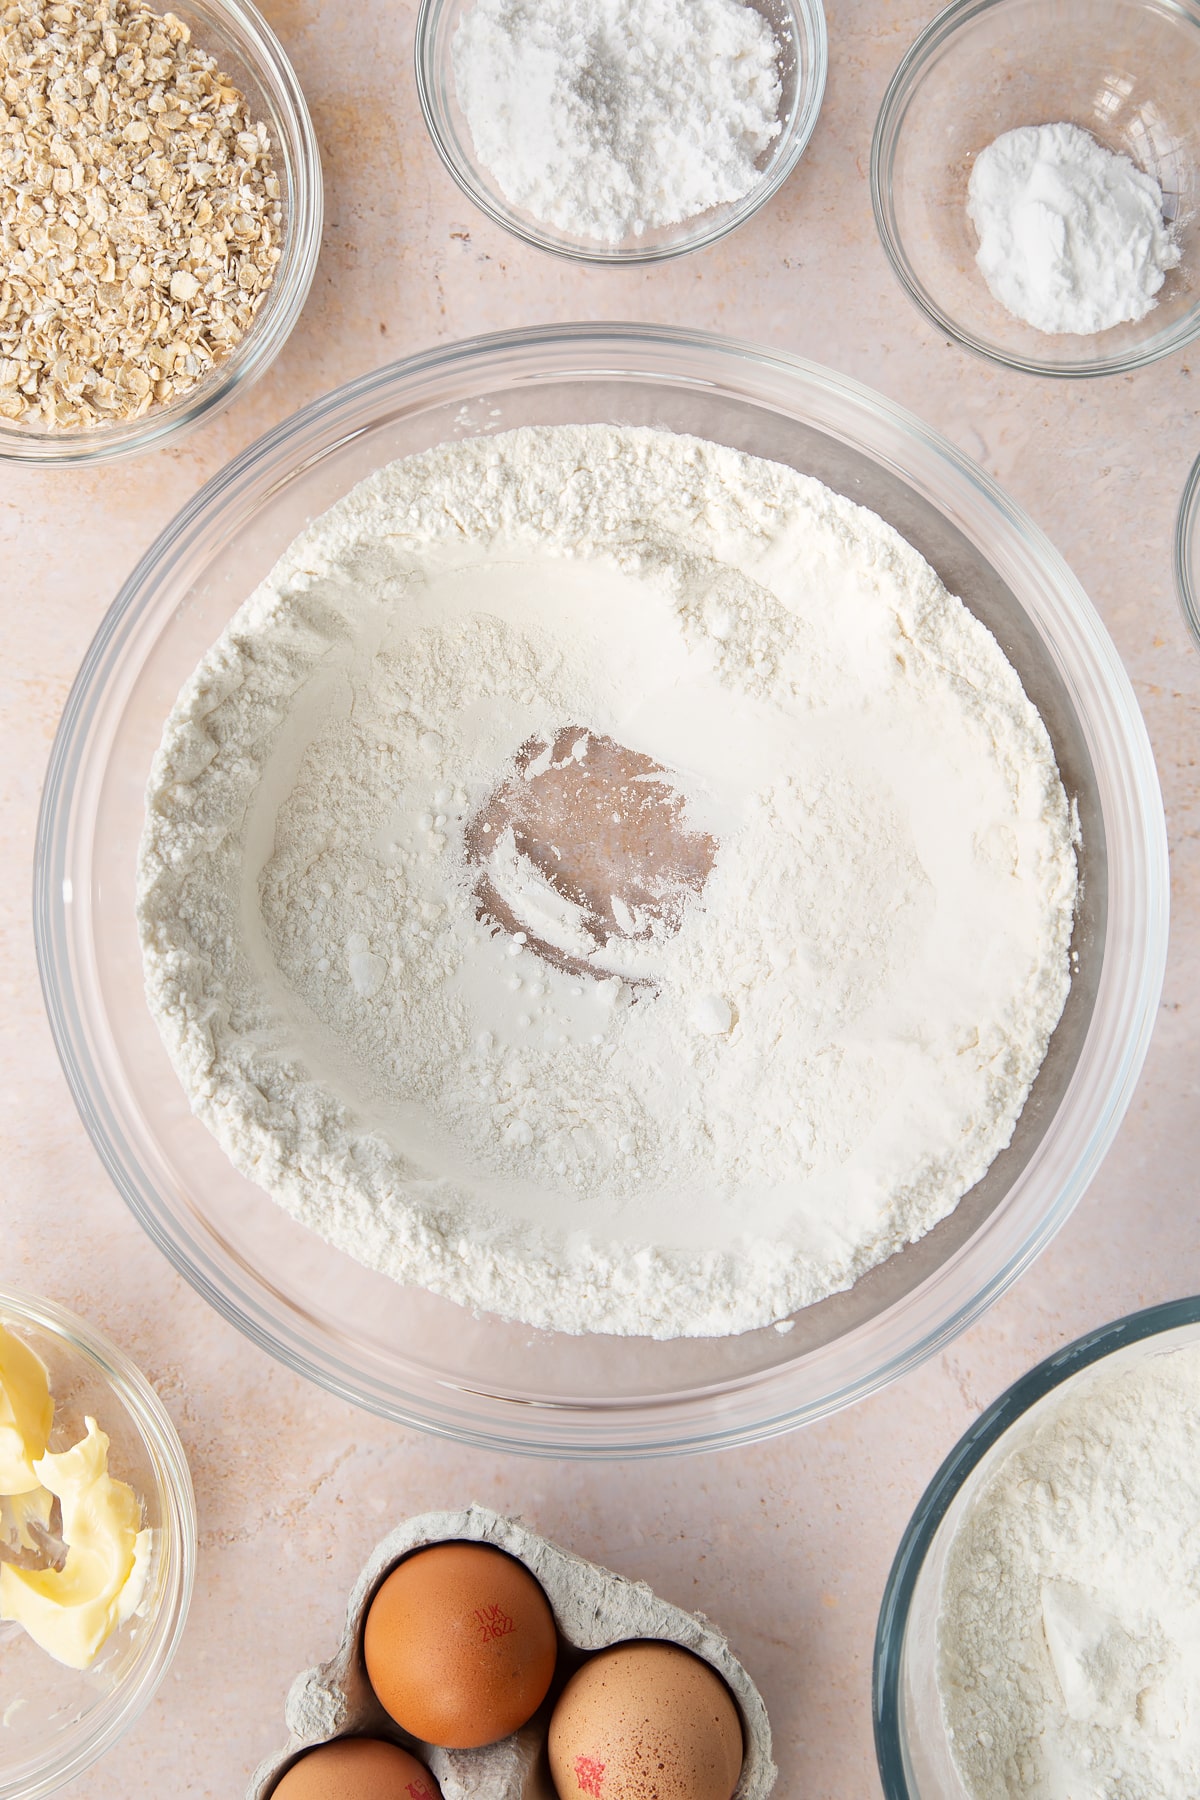 Flour, salt, bicarbonate of soda and icing sugar in a bowl. They're mixed together with a well in the middle. Ingredients to make gluten free crepes surround the bowl.